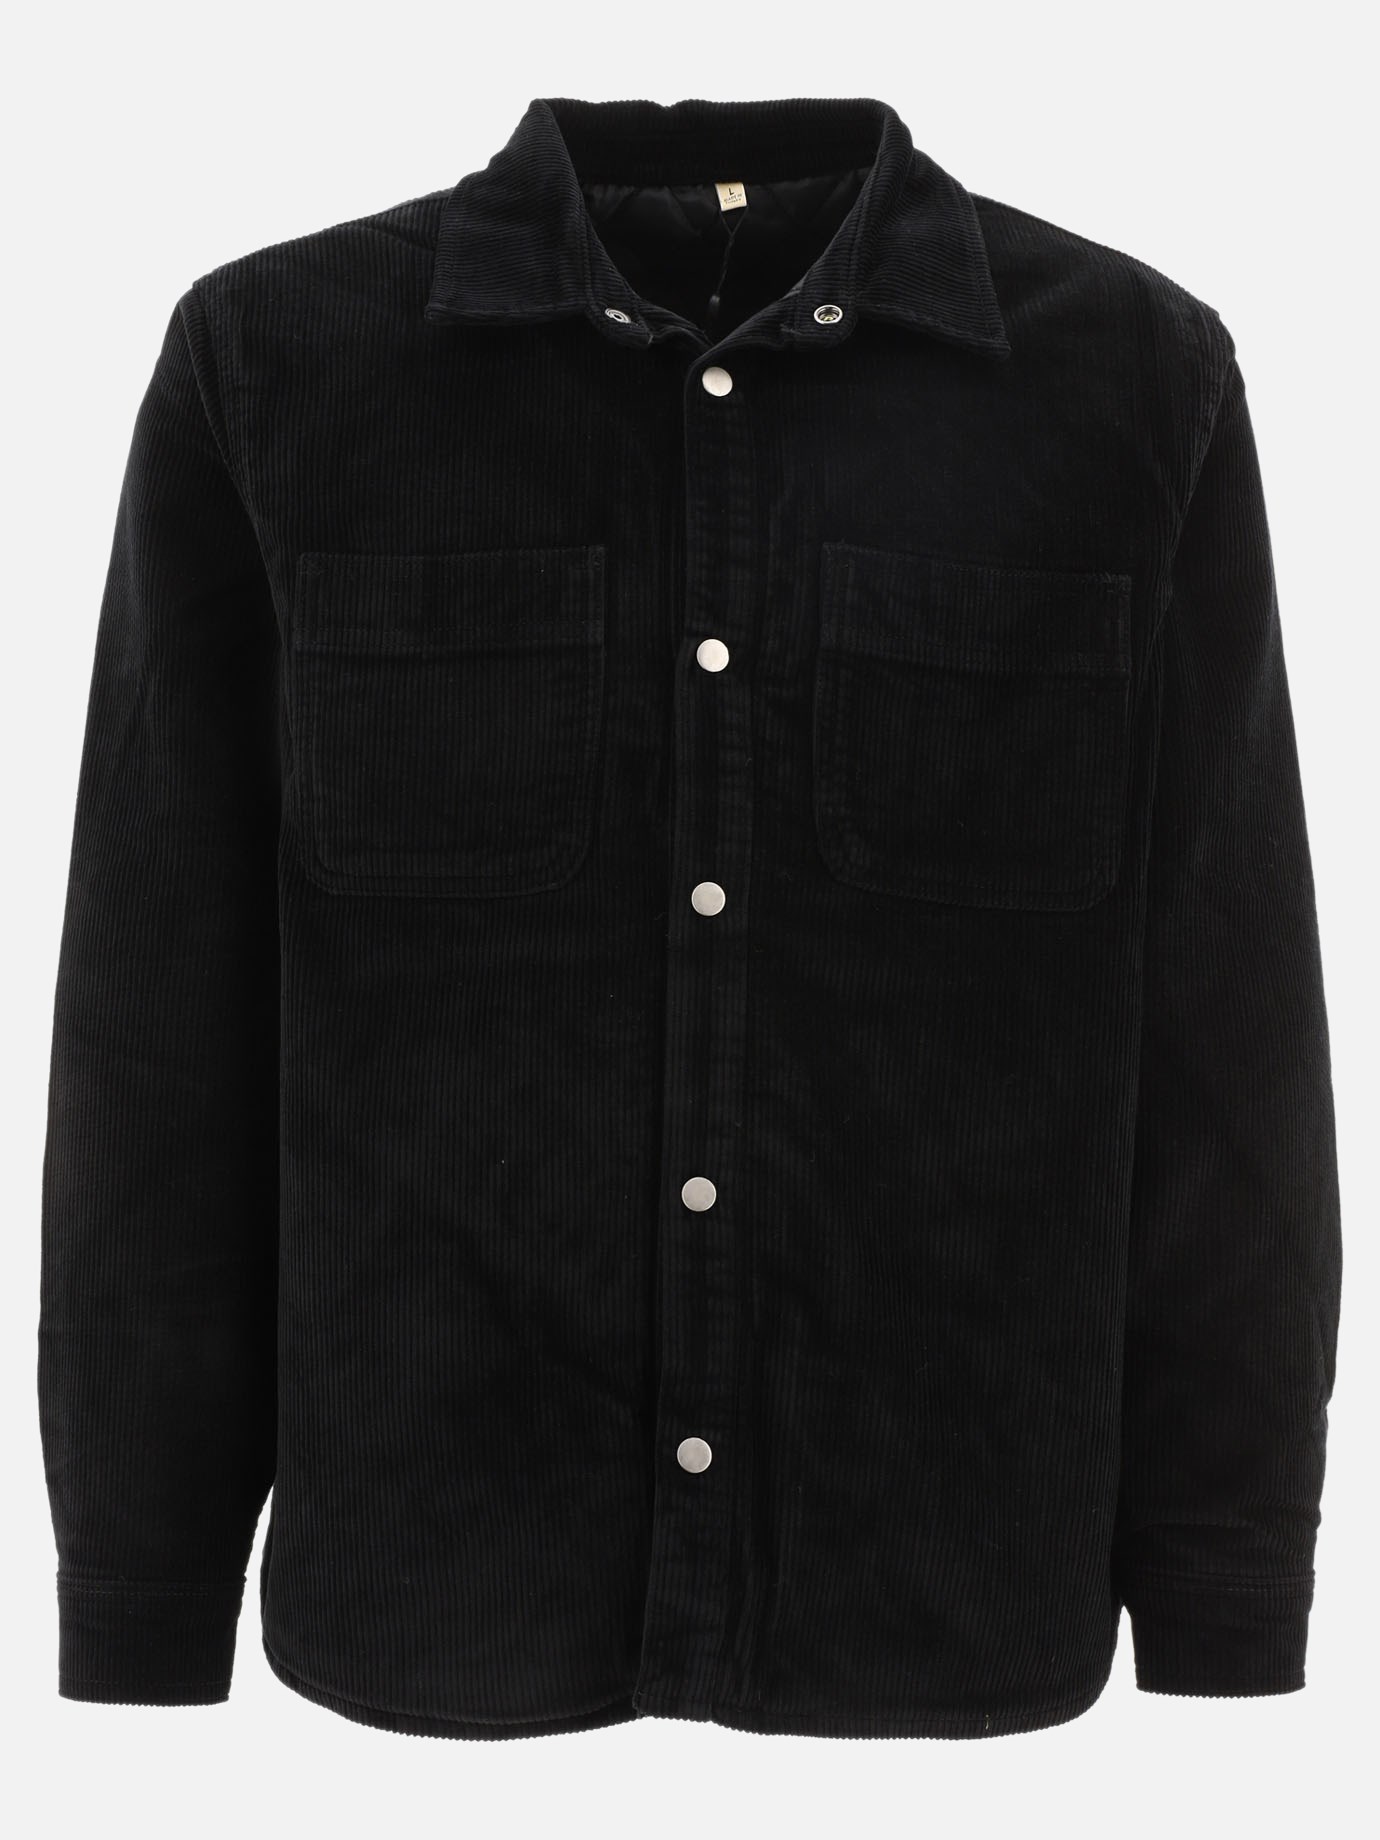 Overshirt  Cord Quilted by Stüssy - 3